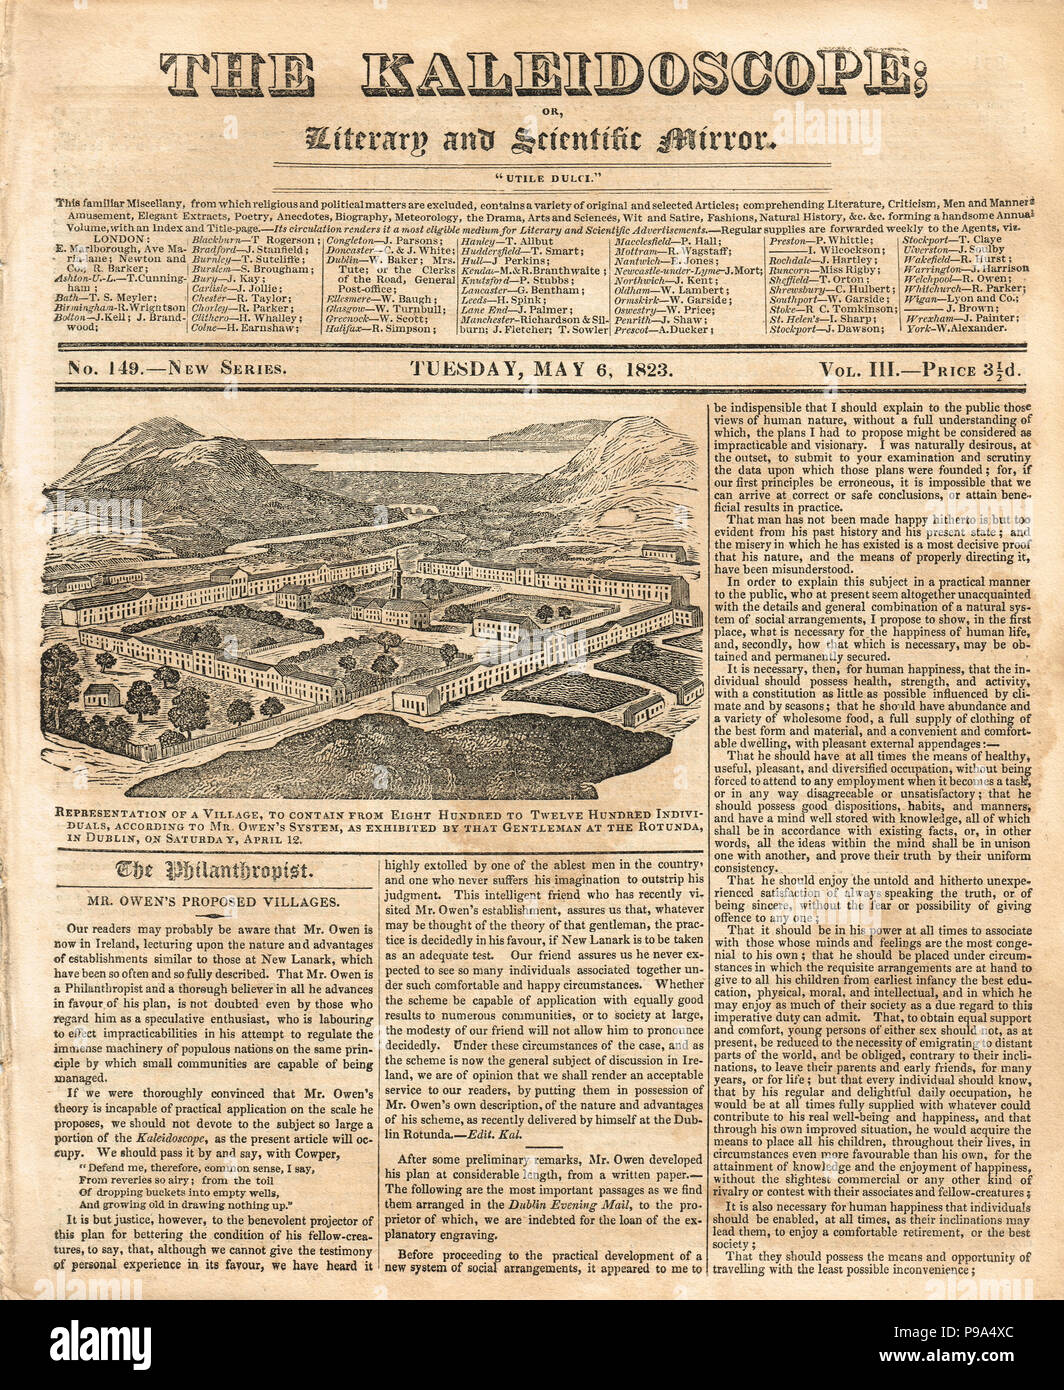 The front page of The Kaleidoscope, or literary and Scientific Mirror, 6 May 1823, reporting on Robert Owen's visit to Ireland where he outlined plans for a model village in Ireland, at the Rotunda in Dublin on 12 April 1823. Stock Photo